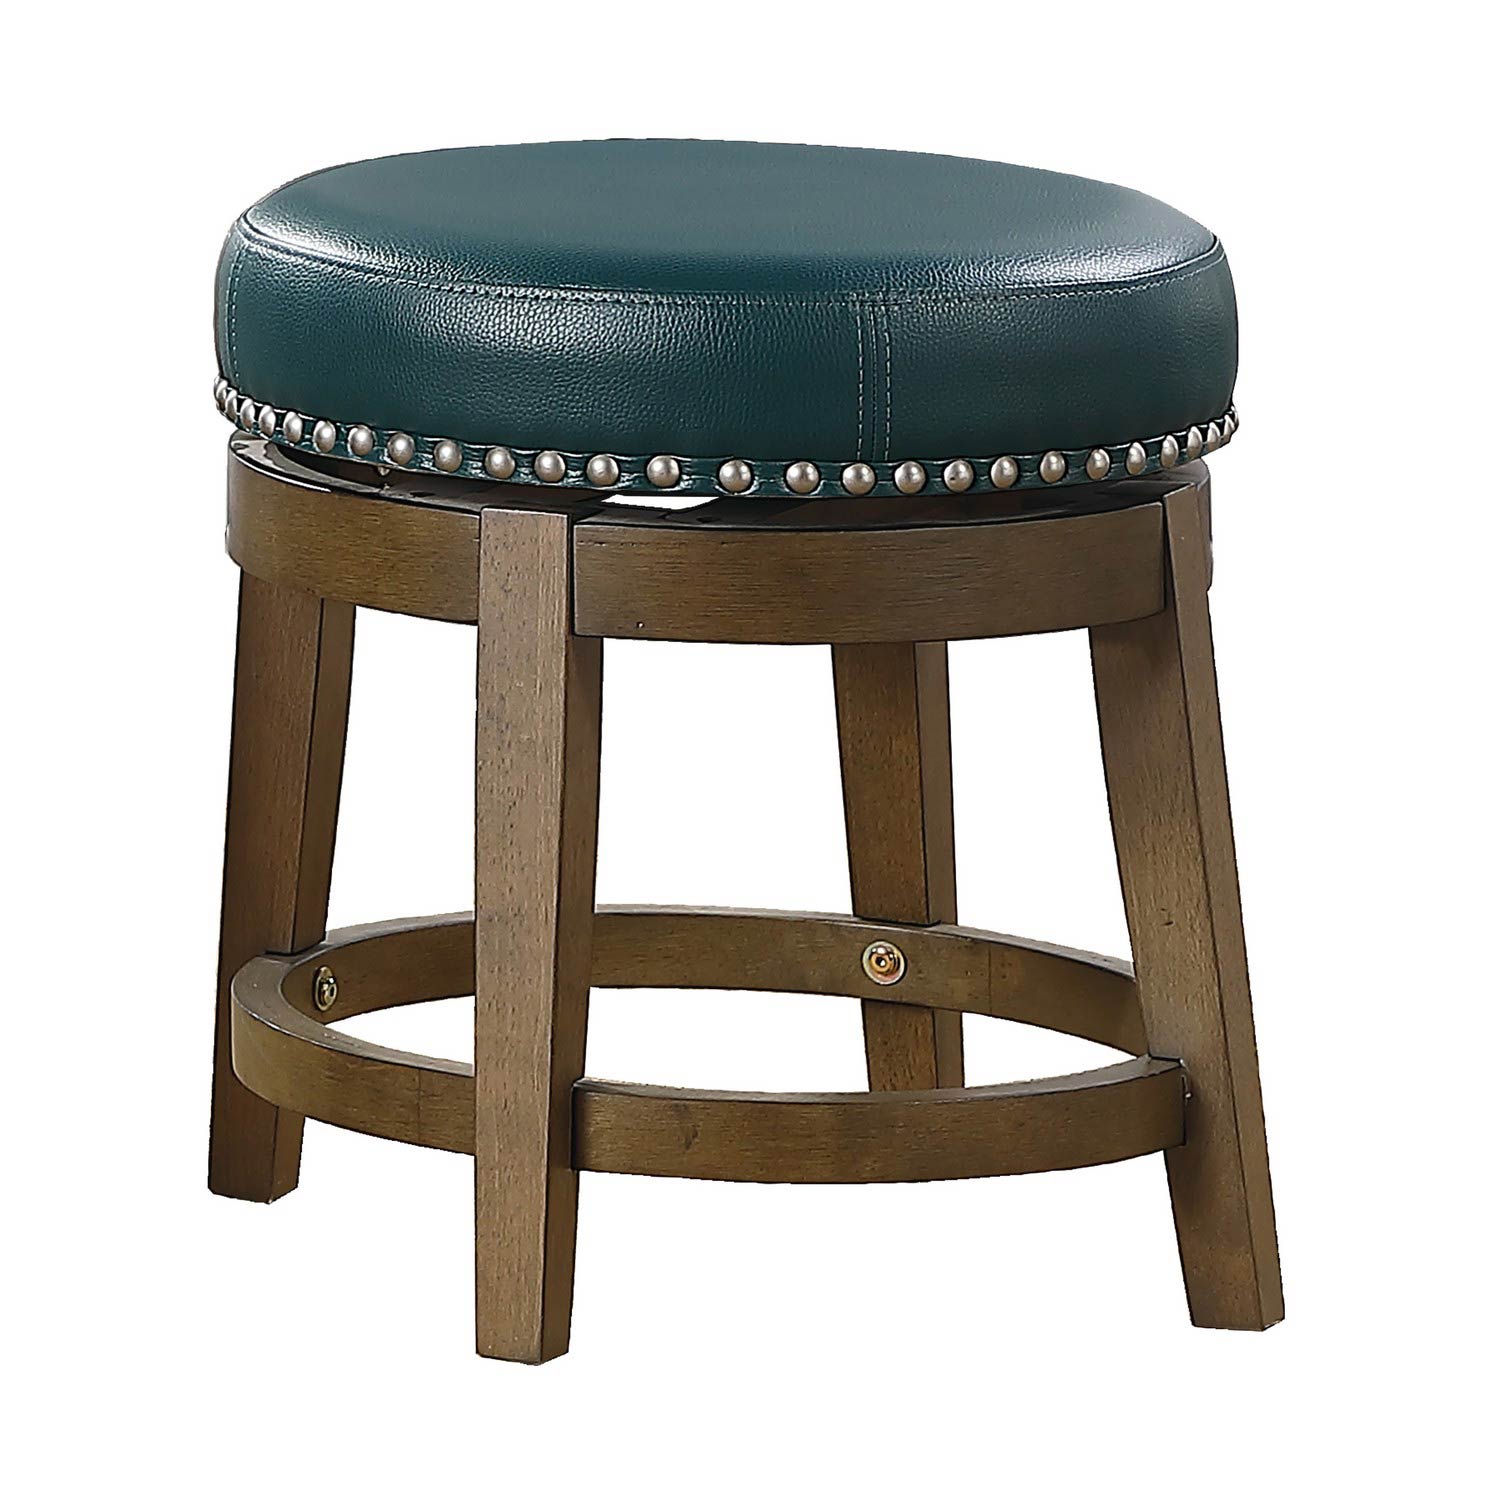 Homelegance Westby Swivel Dining Stool - Green - Brown